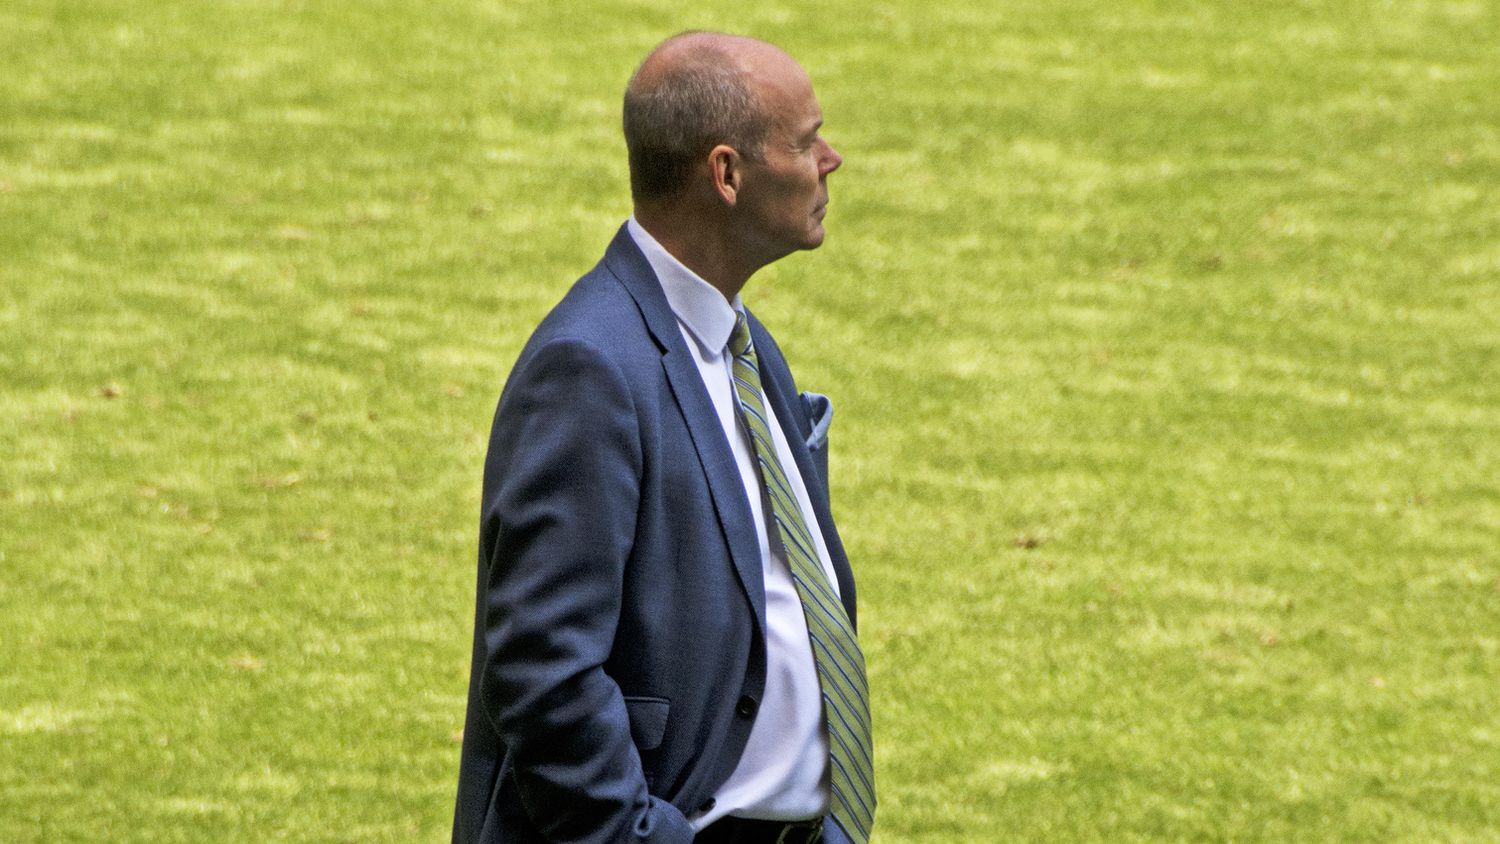 Sir Clive Woodward inspired England's rugby players to World Cup victory in 2003.